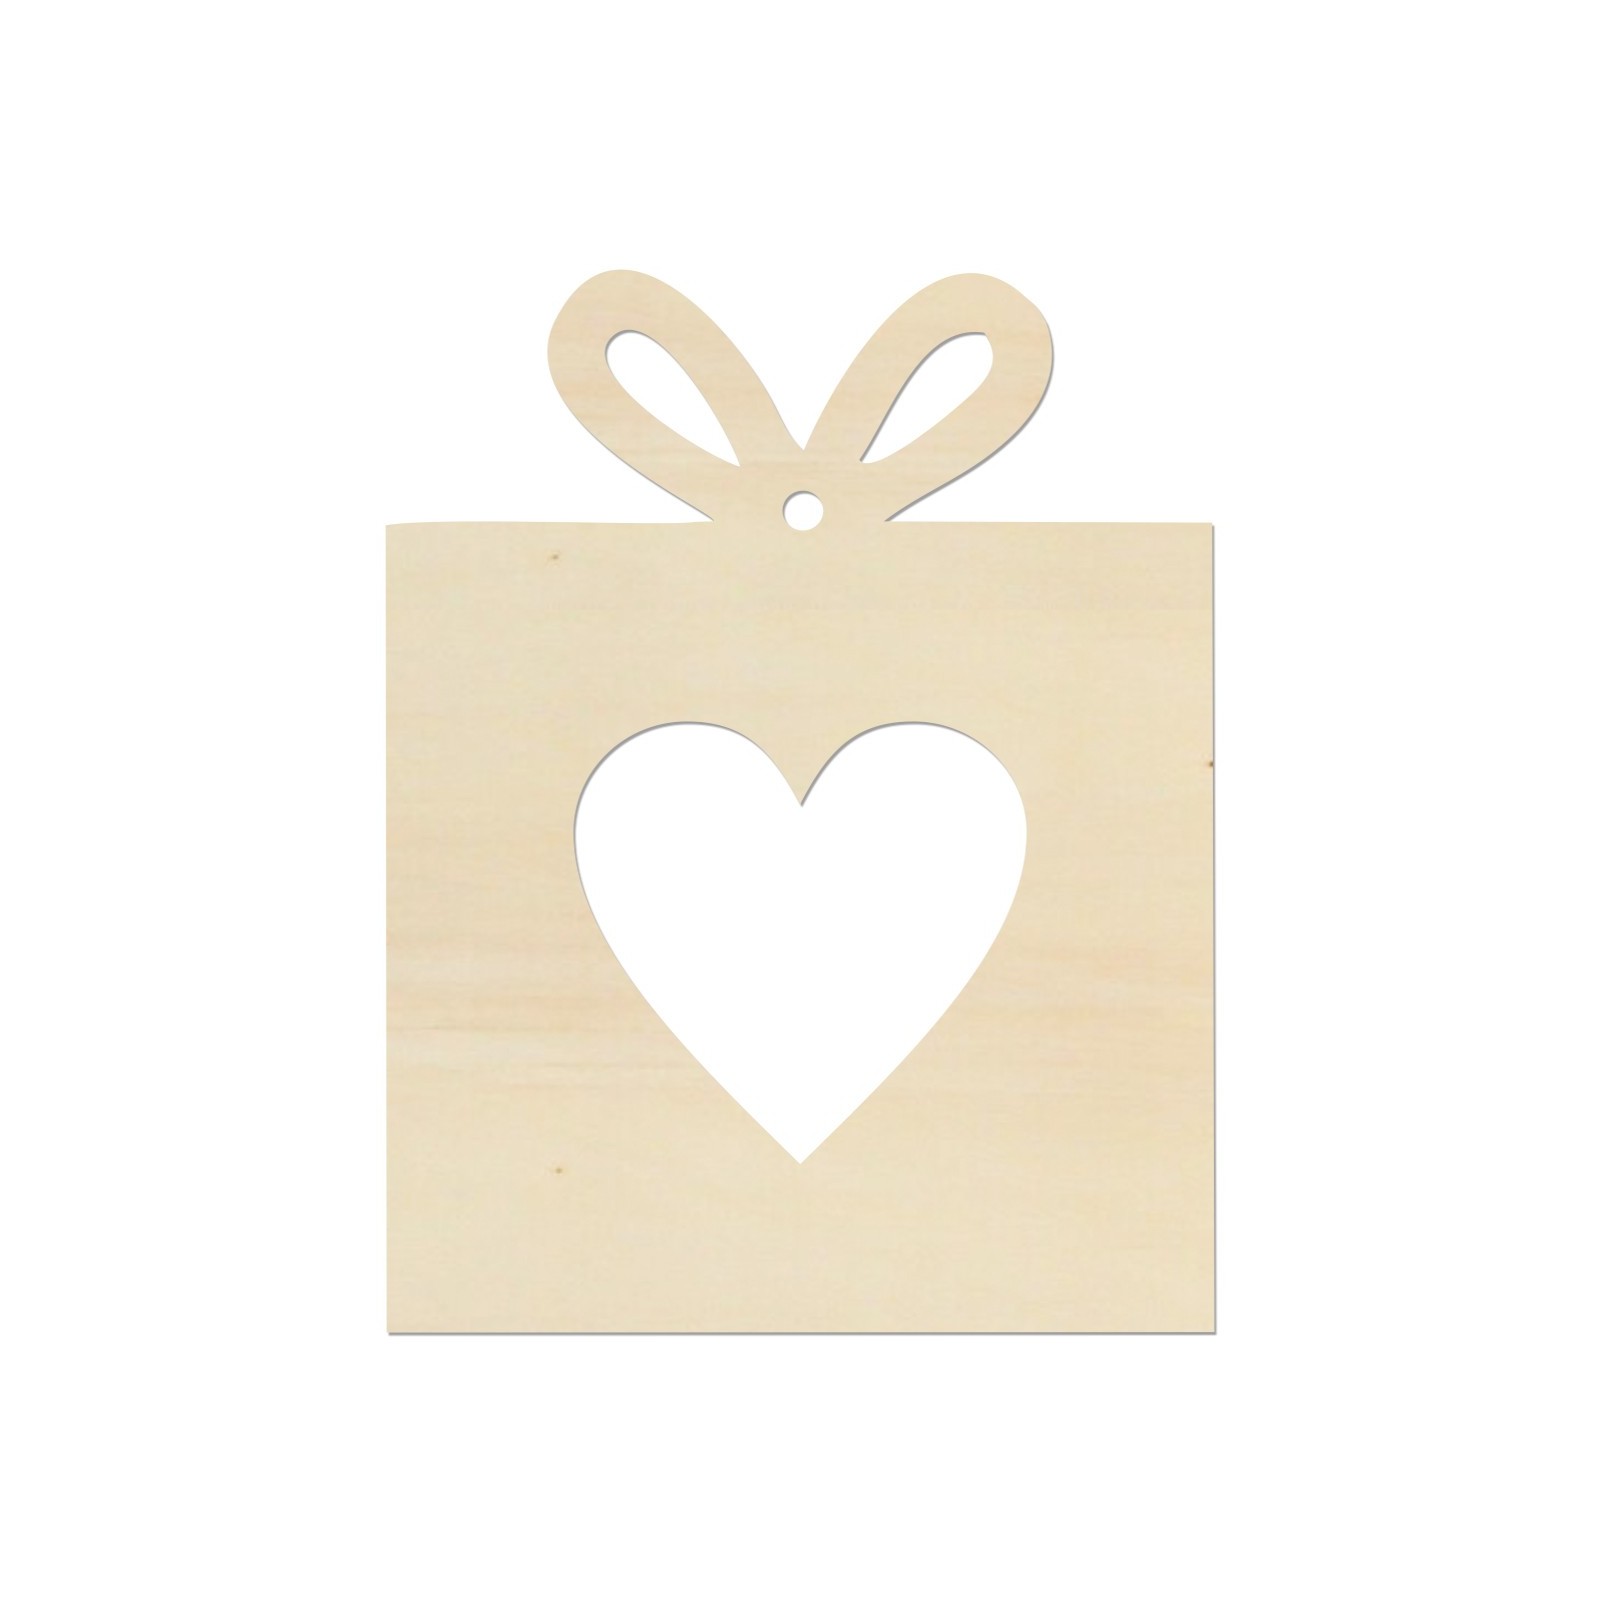 Gift with a heart 9x7 cm